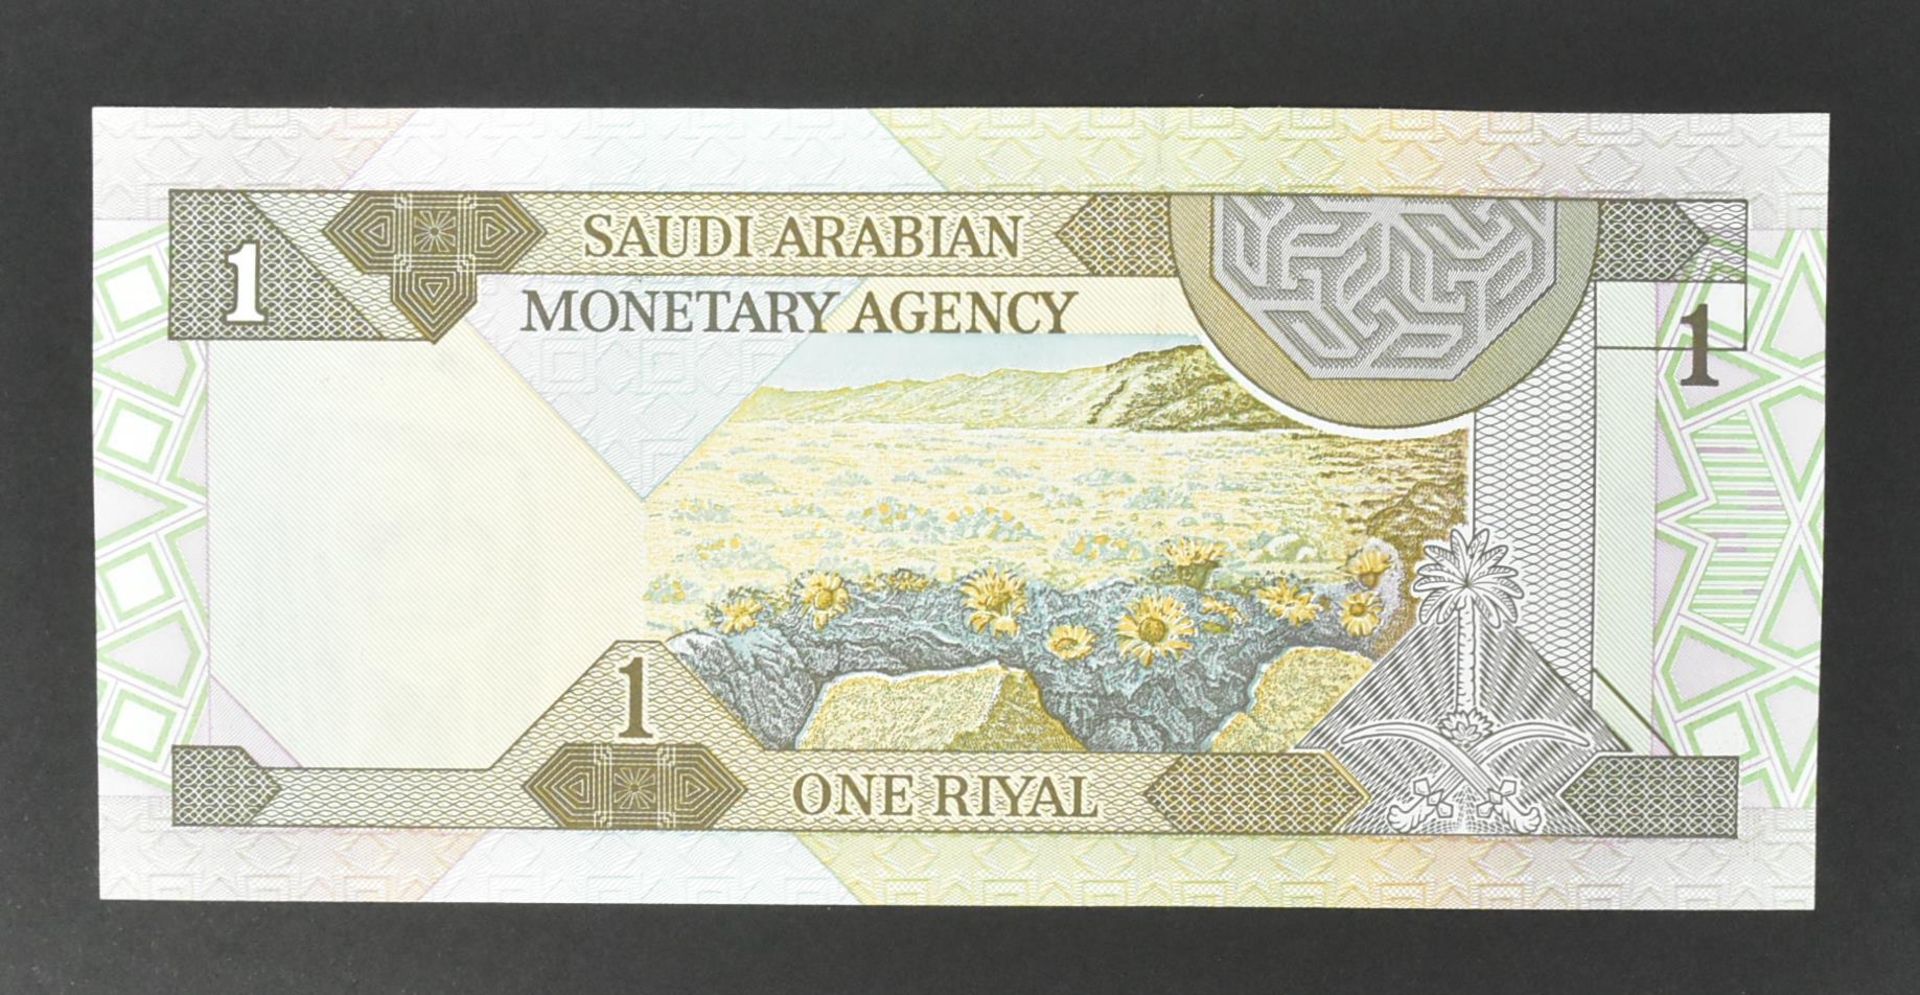 COLLECTION OF INTERNATIONAL UNCIRCULATED BANK NOTES - OMAN - Image 22 of 51